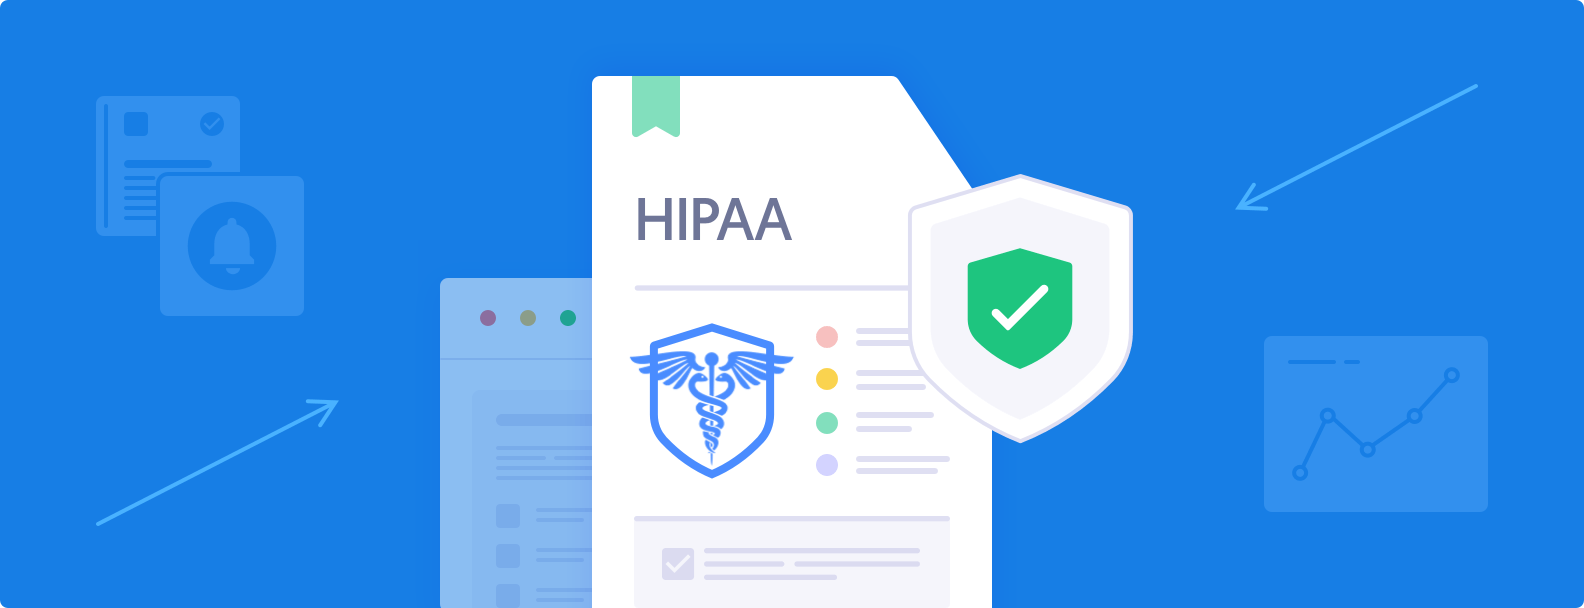 Why is HIPAA Important to Privacy and Security?